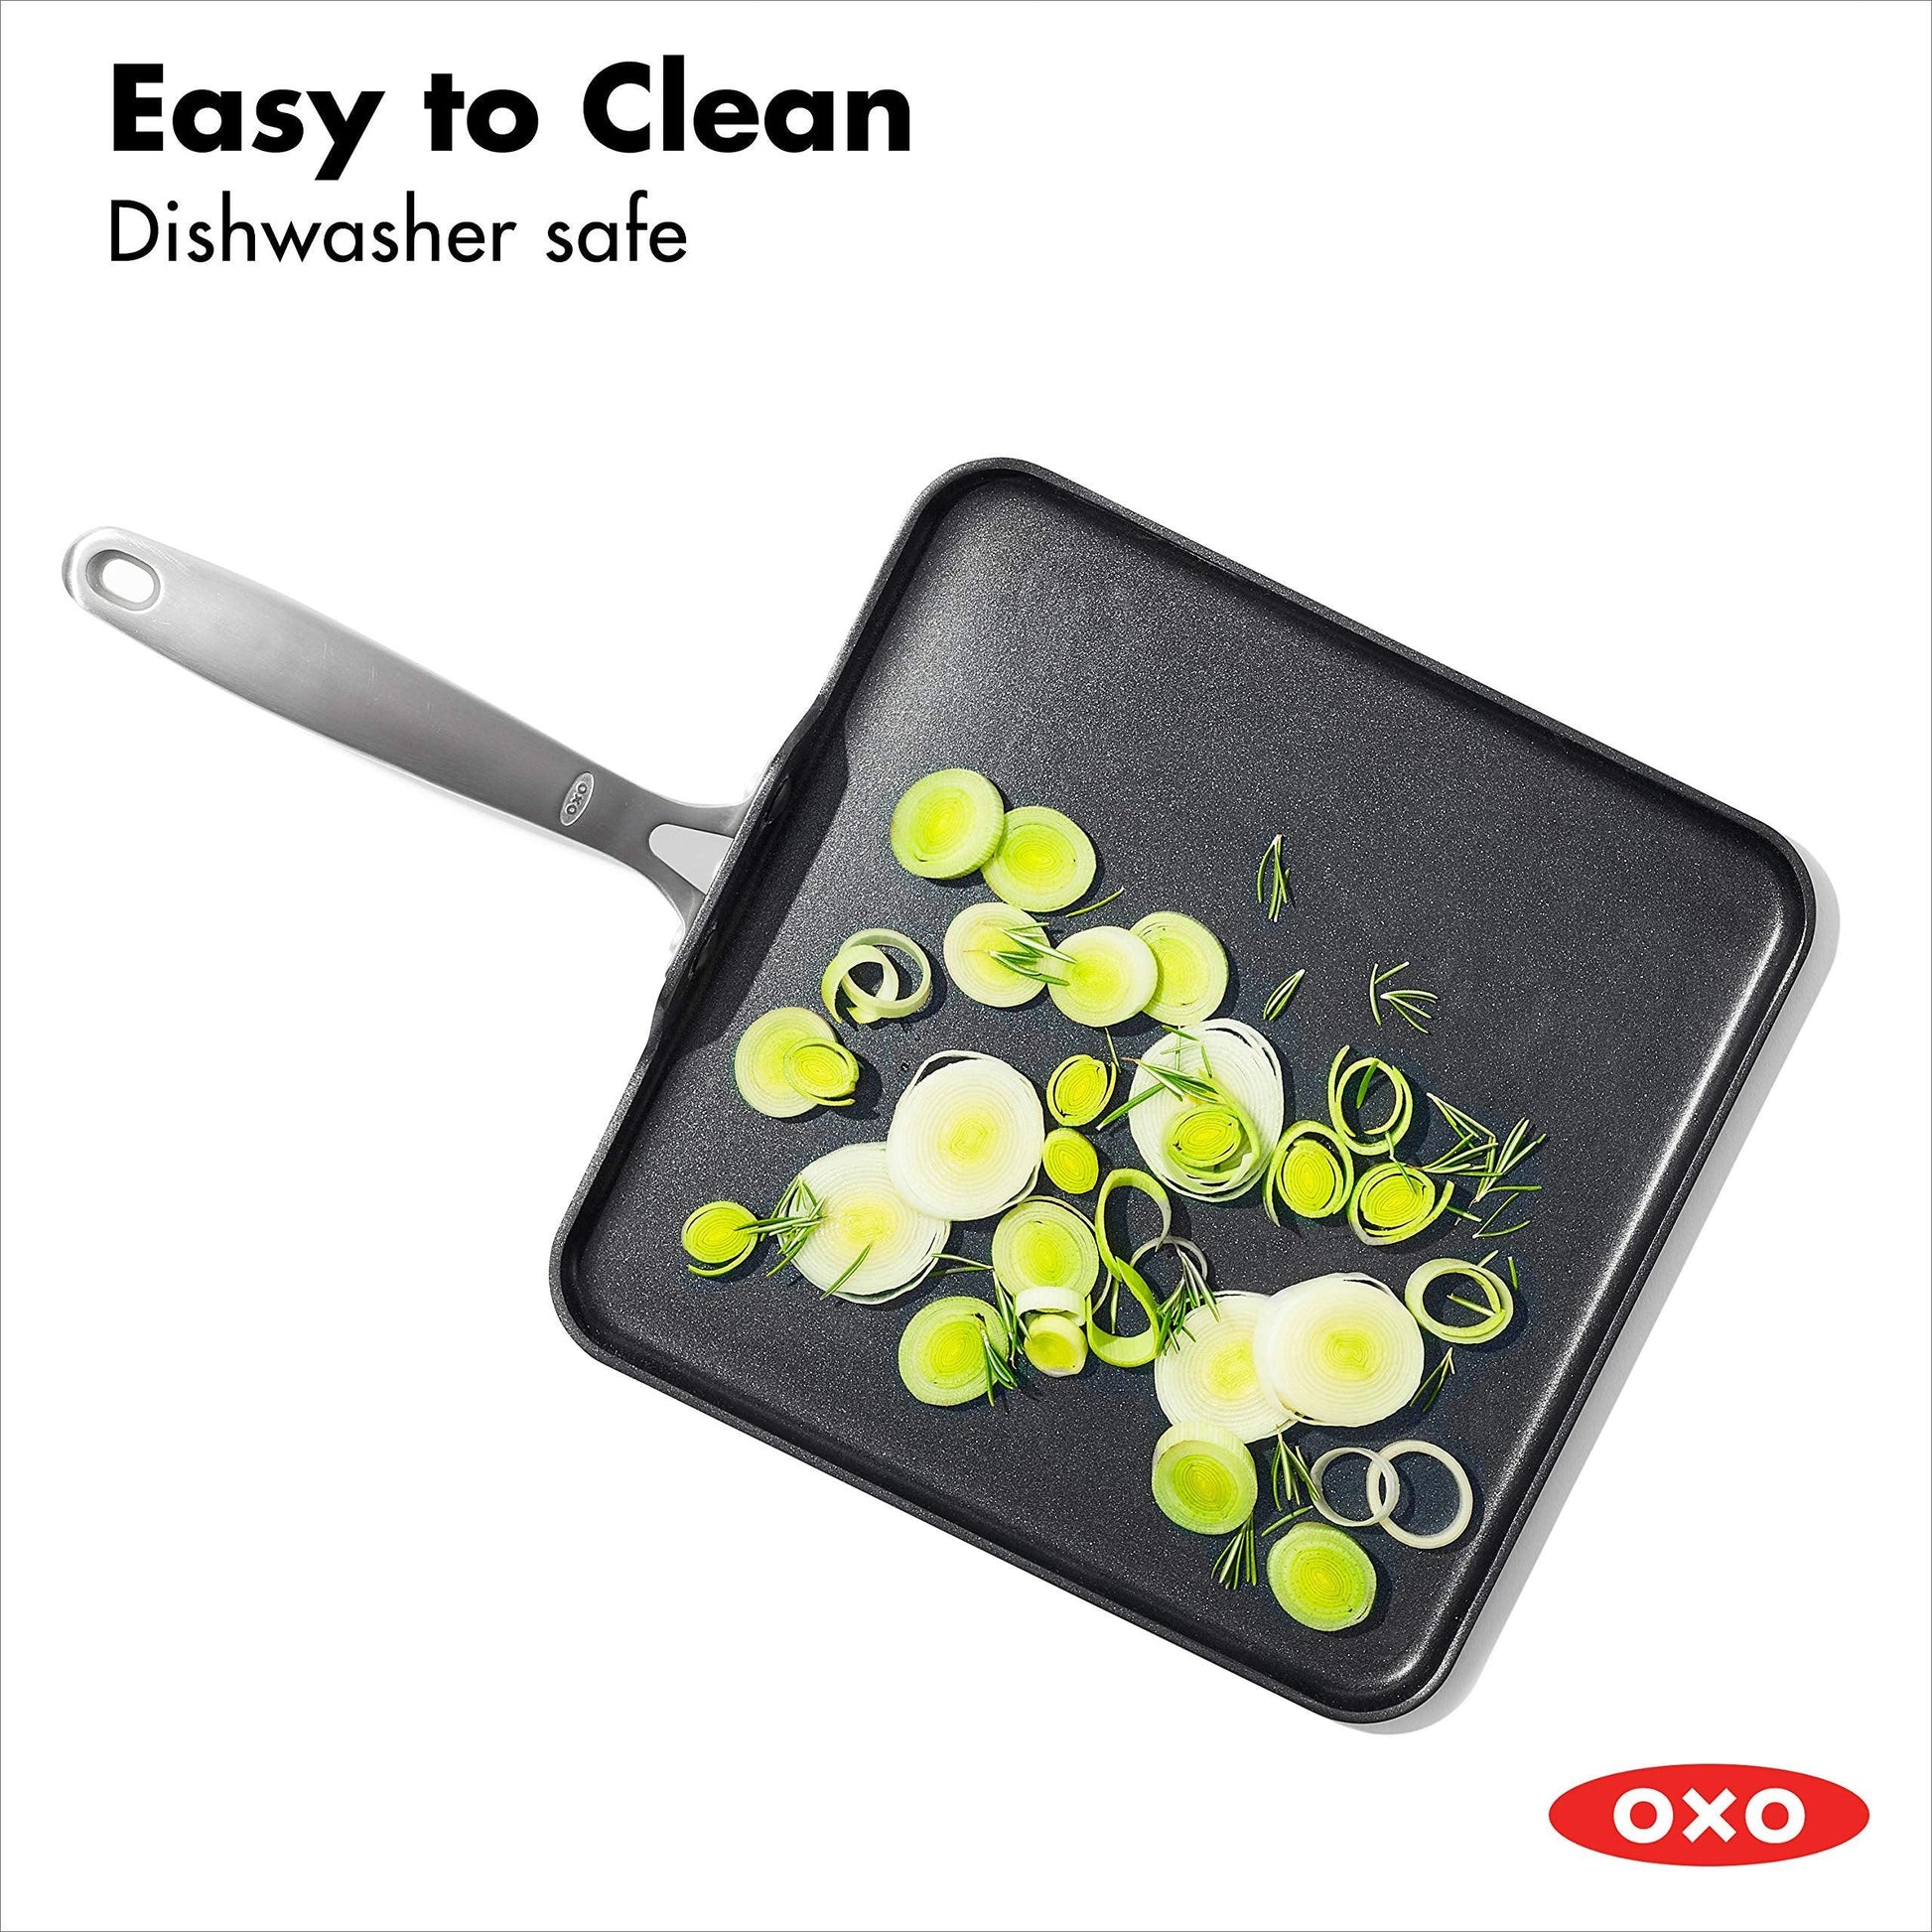 OXO Good Grips Pro 11" Griddle Pan, 3-Layered German Engineered Nonstick Coating, Dishwasher Safe, Oven Safe, Stainless Steel Handle, Black - CookCave